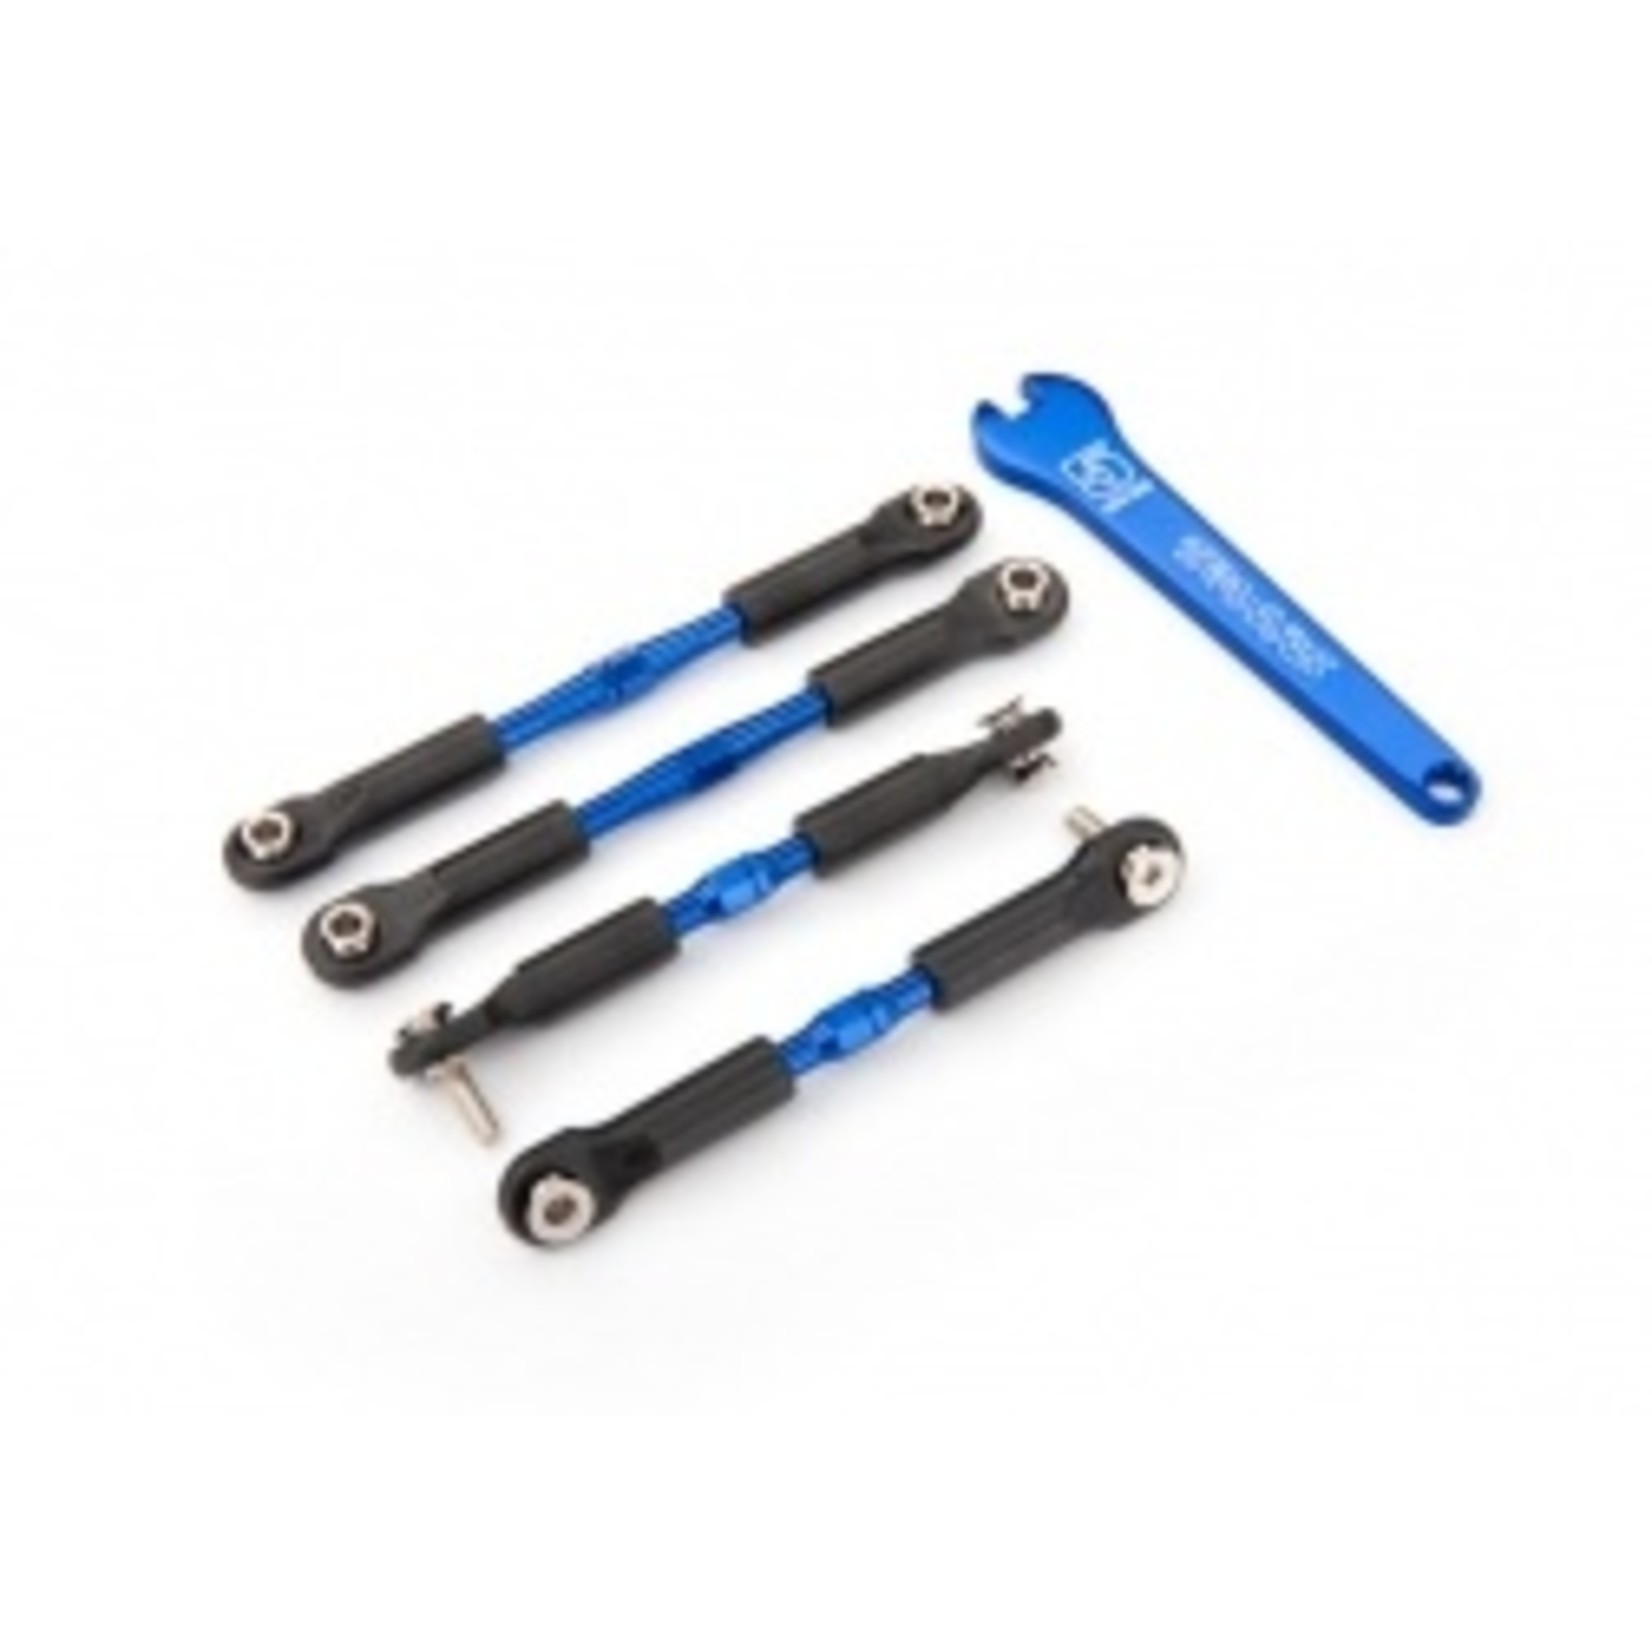 Traxxas Turnbuckles, aluminum (blue-anodized), camber links, front, 39mm (2), rear, 49mm (2) (assembled w/rod ends & hollow balls)/ wrench